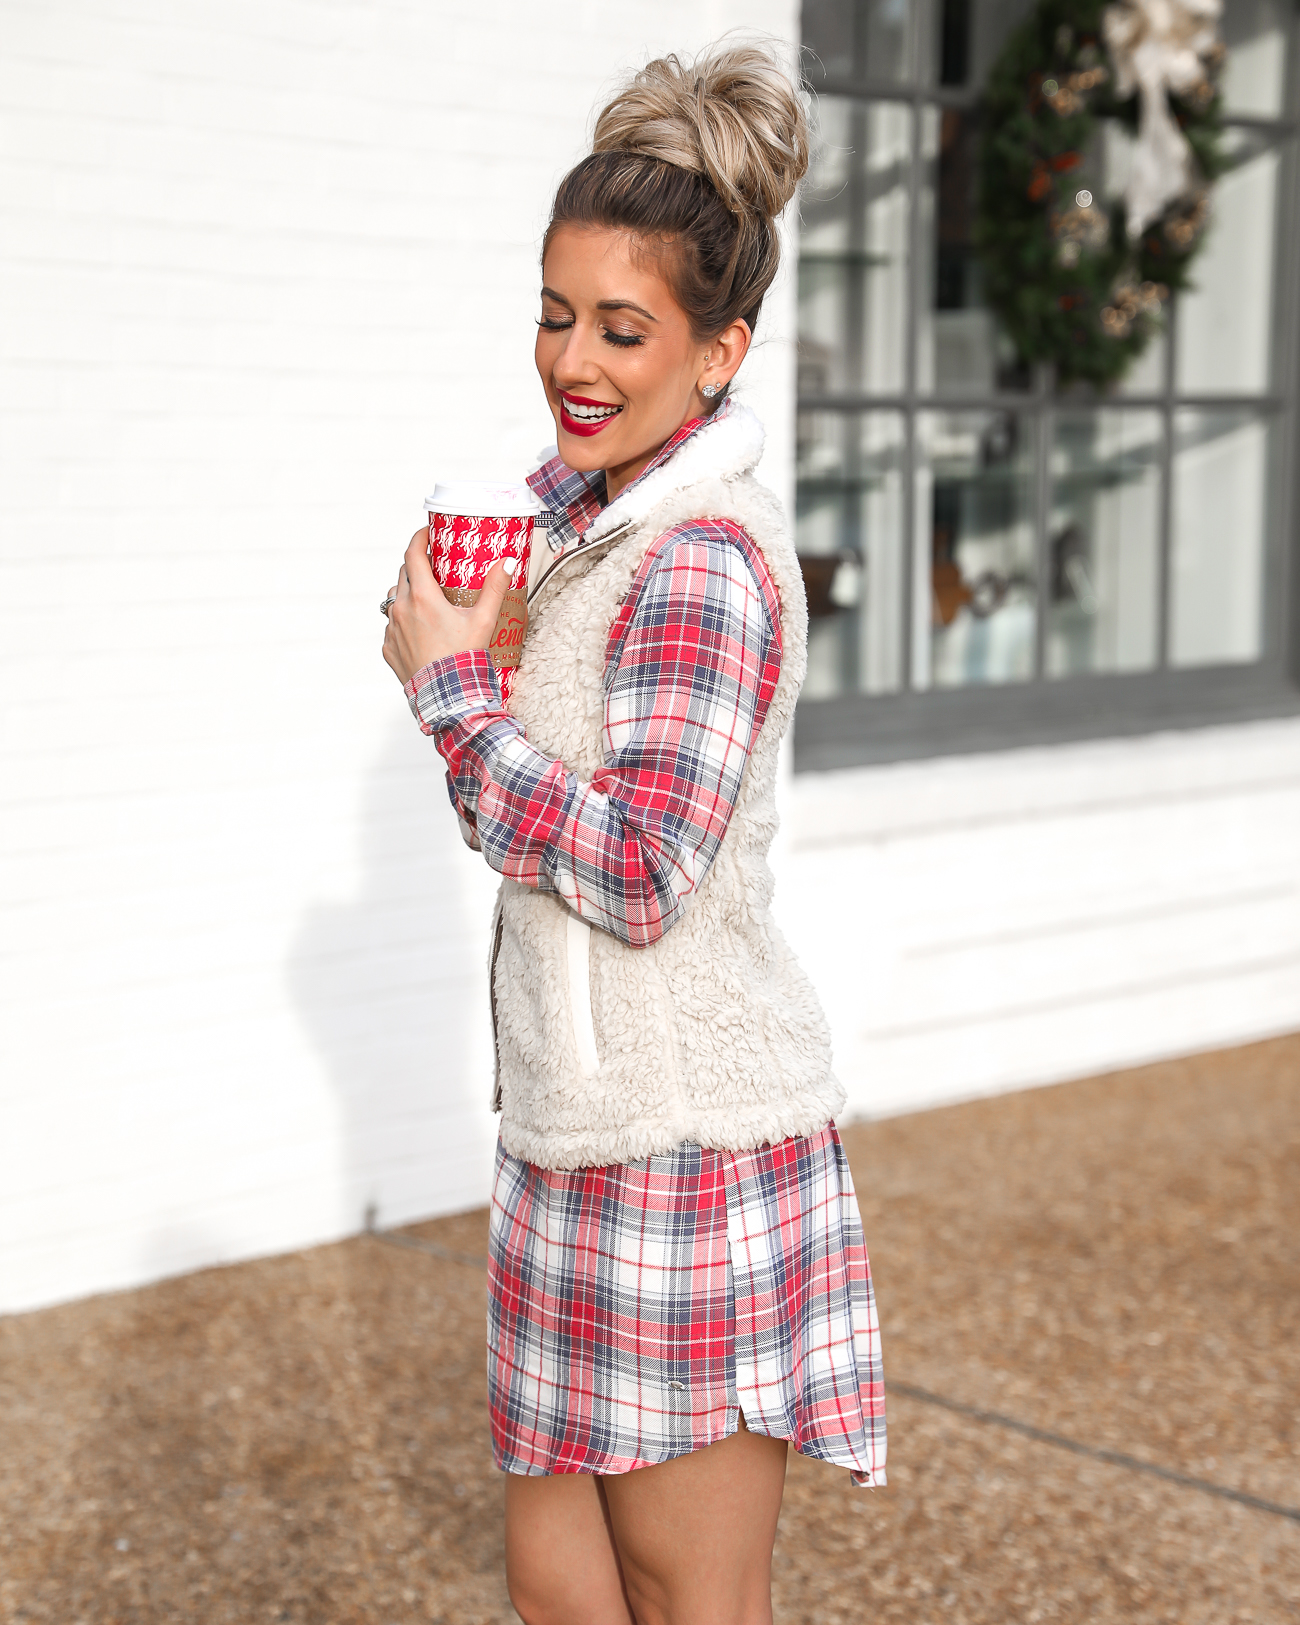 Southern Shirt Plaid Shirt Dress White Sherpa Fleece Vest Red Starbucks Cup Casual Holiday Outfit 